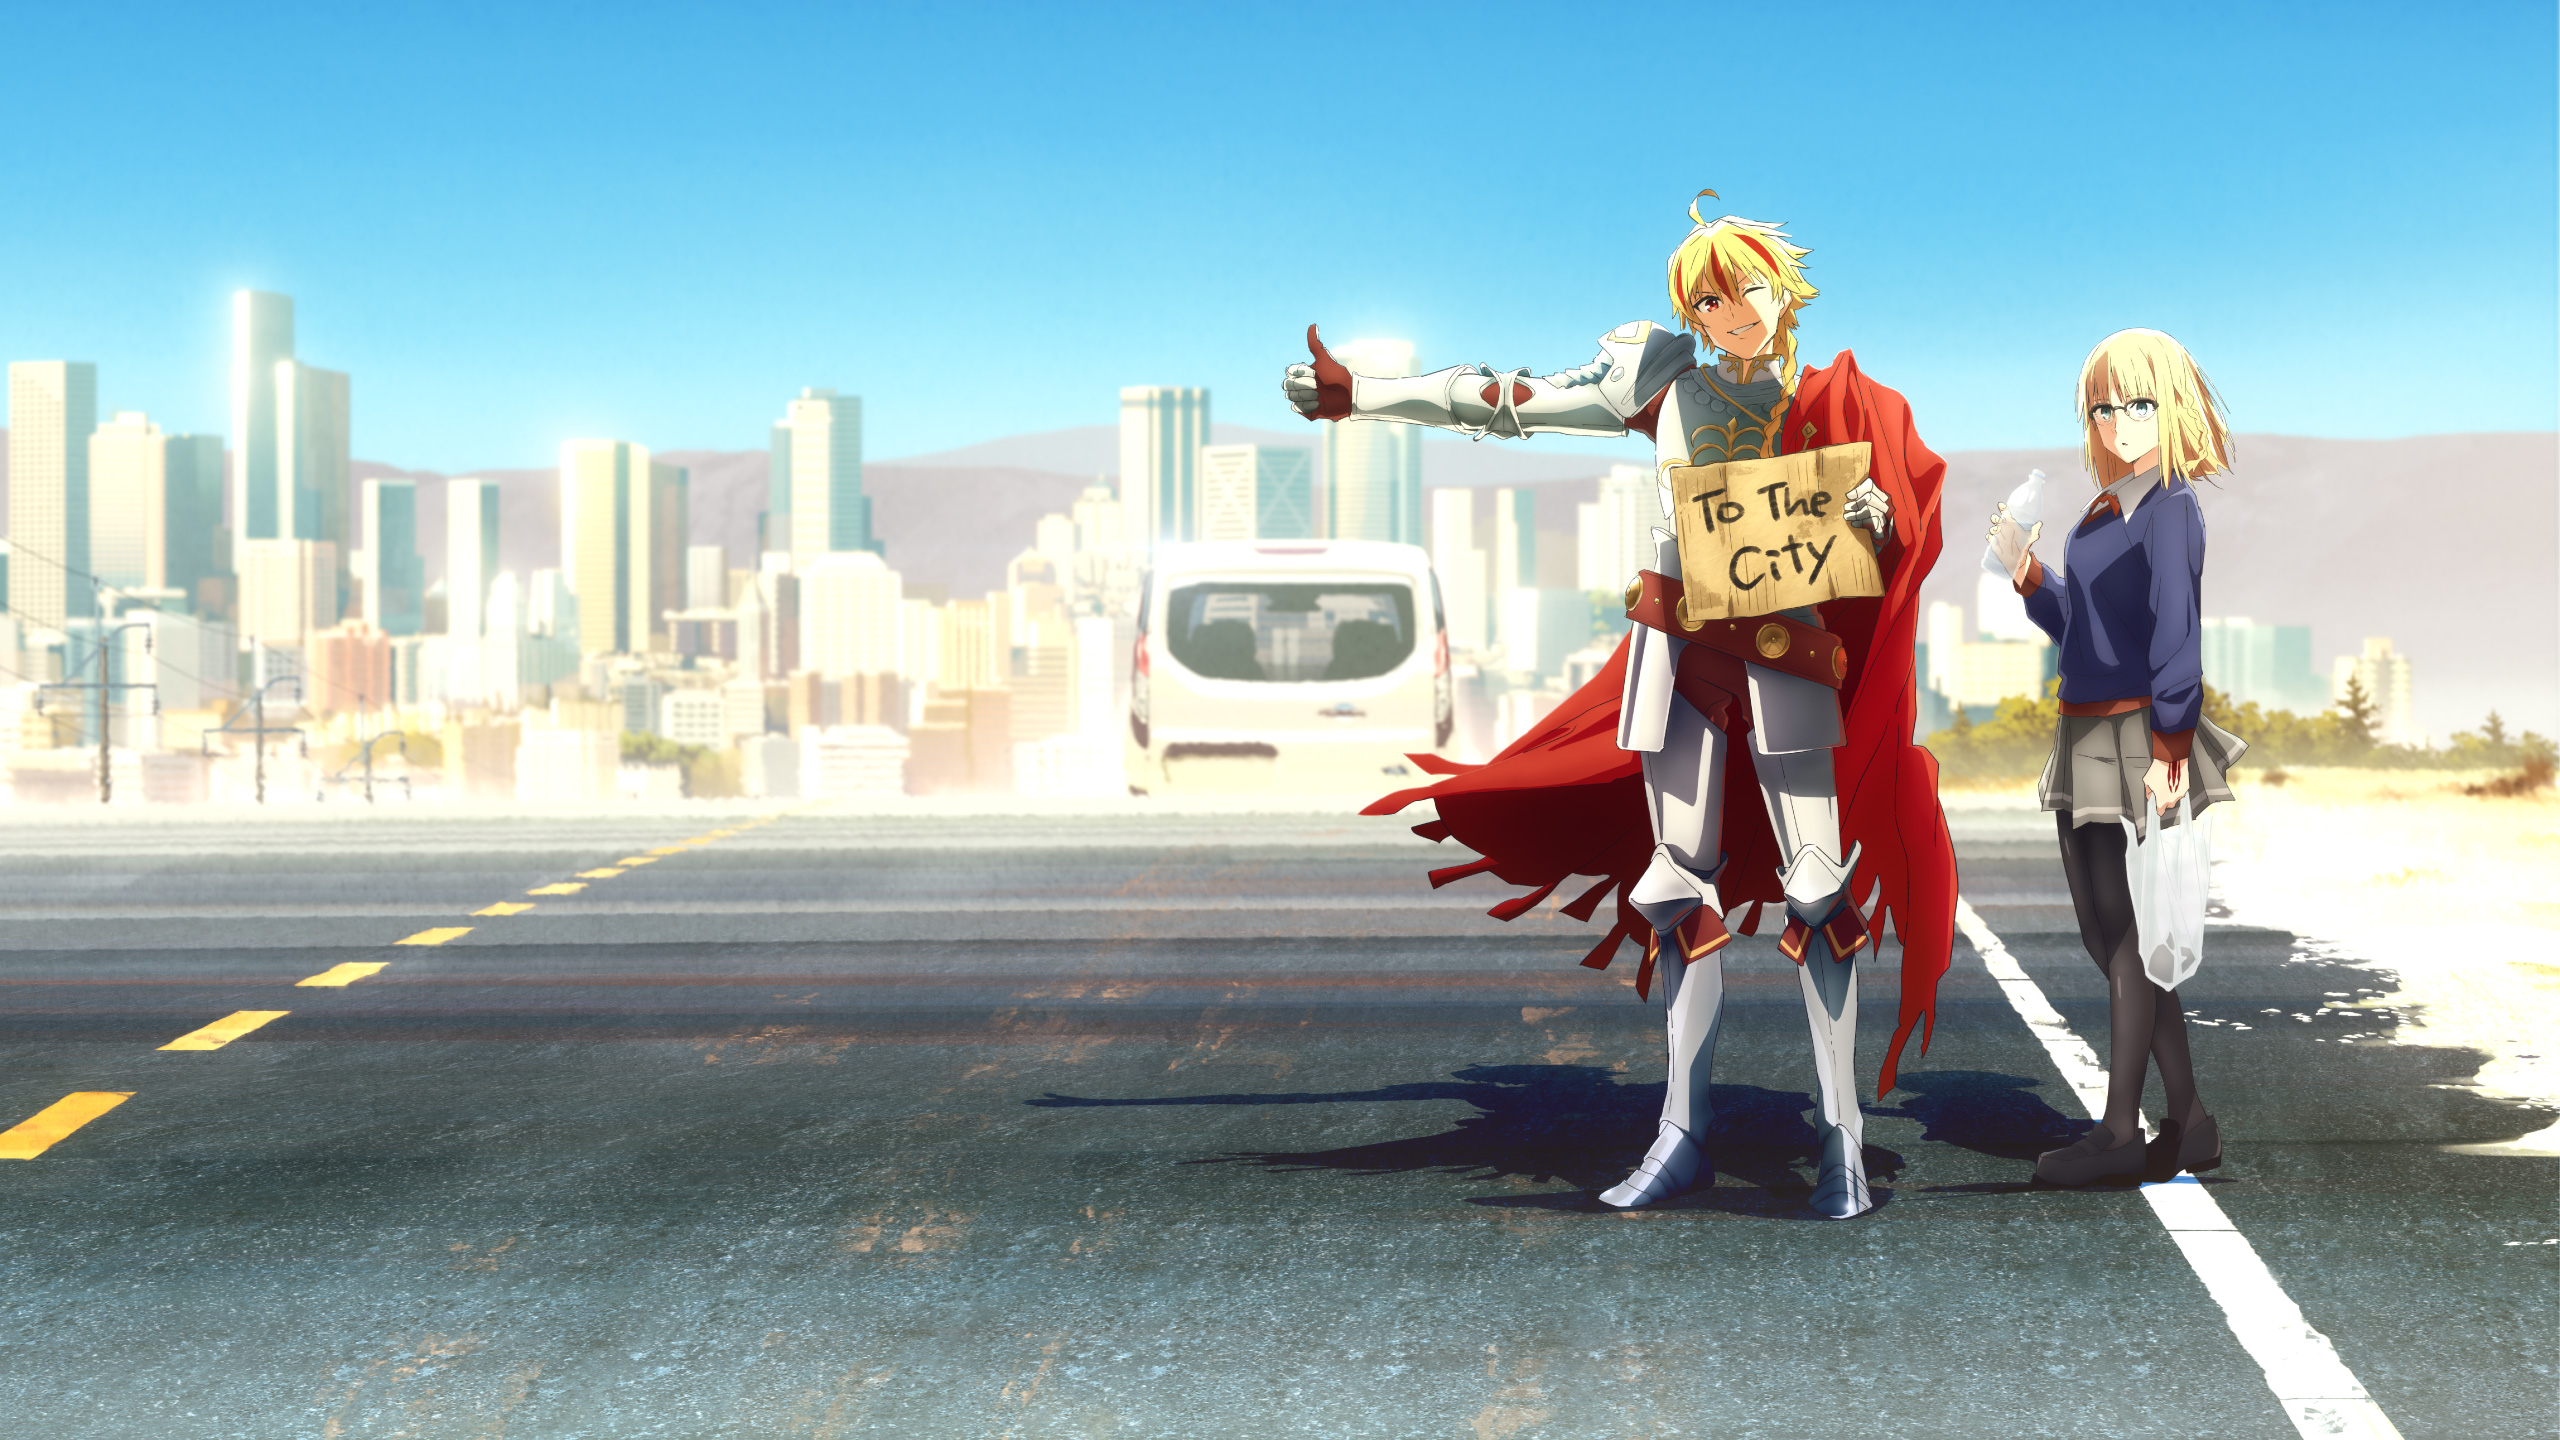 Fate.strange.fake.full.1021083 – Anime Reviews and Lots of Other Stuff!